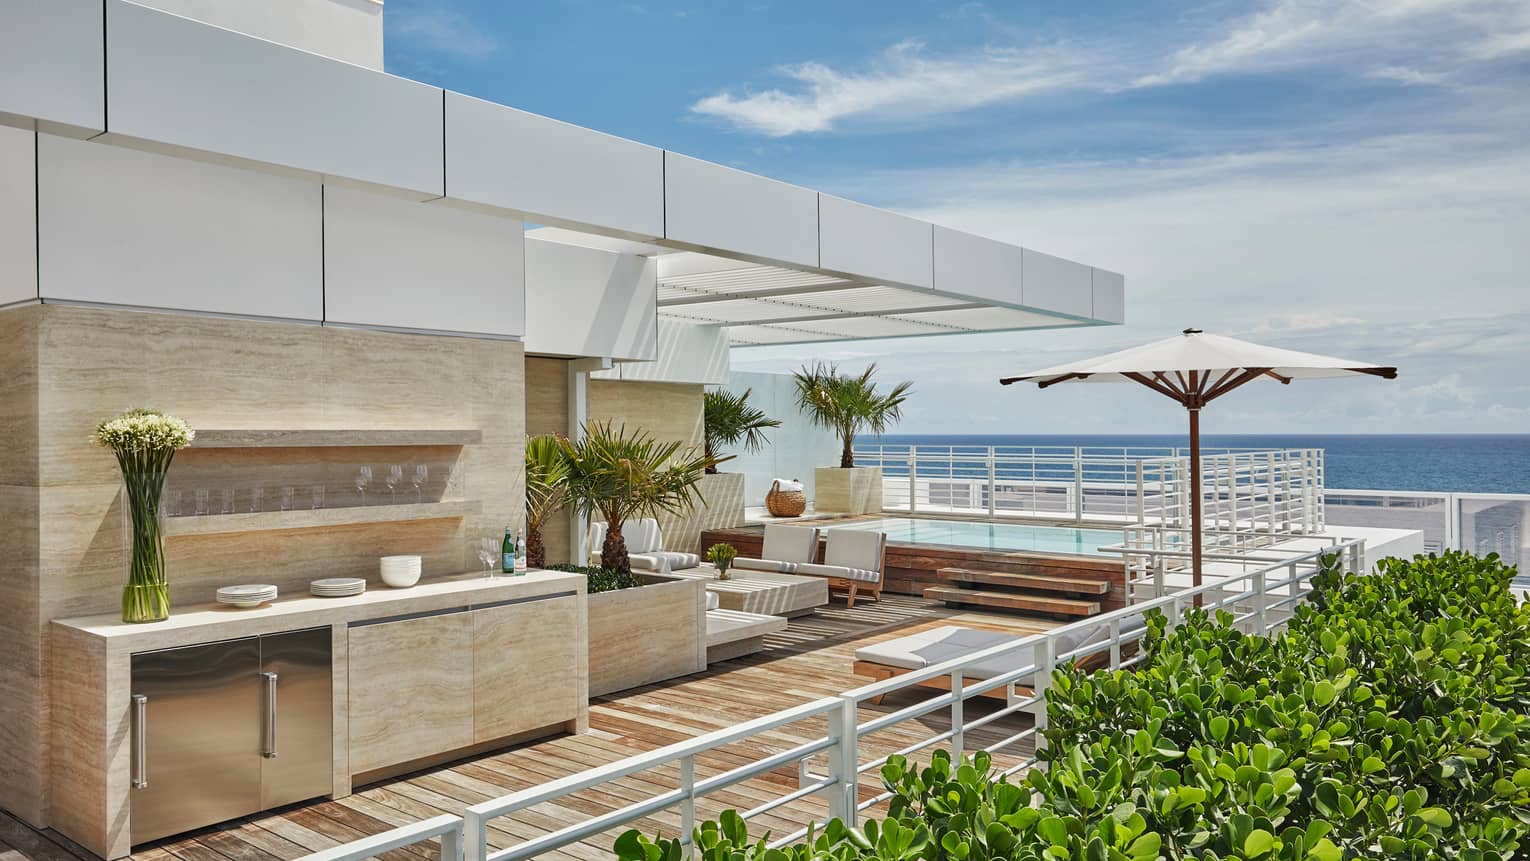 Marble outdoor bar and kitchenette with glasses, flowers, white sofas on modern rooftop patio with ocean views